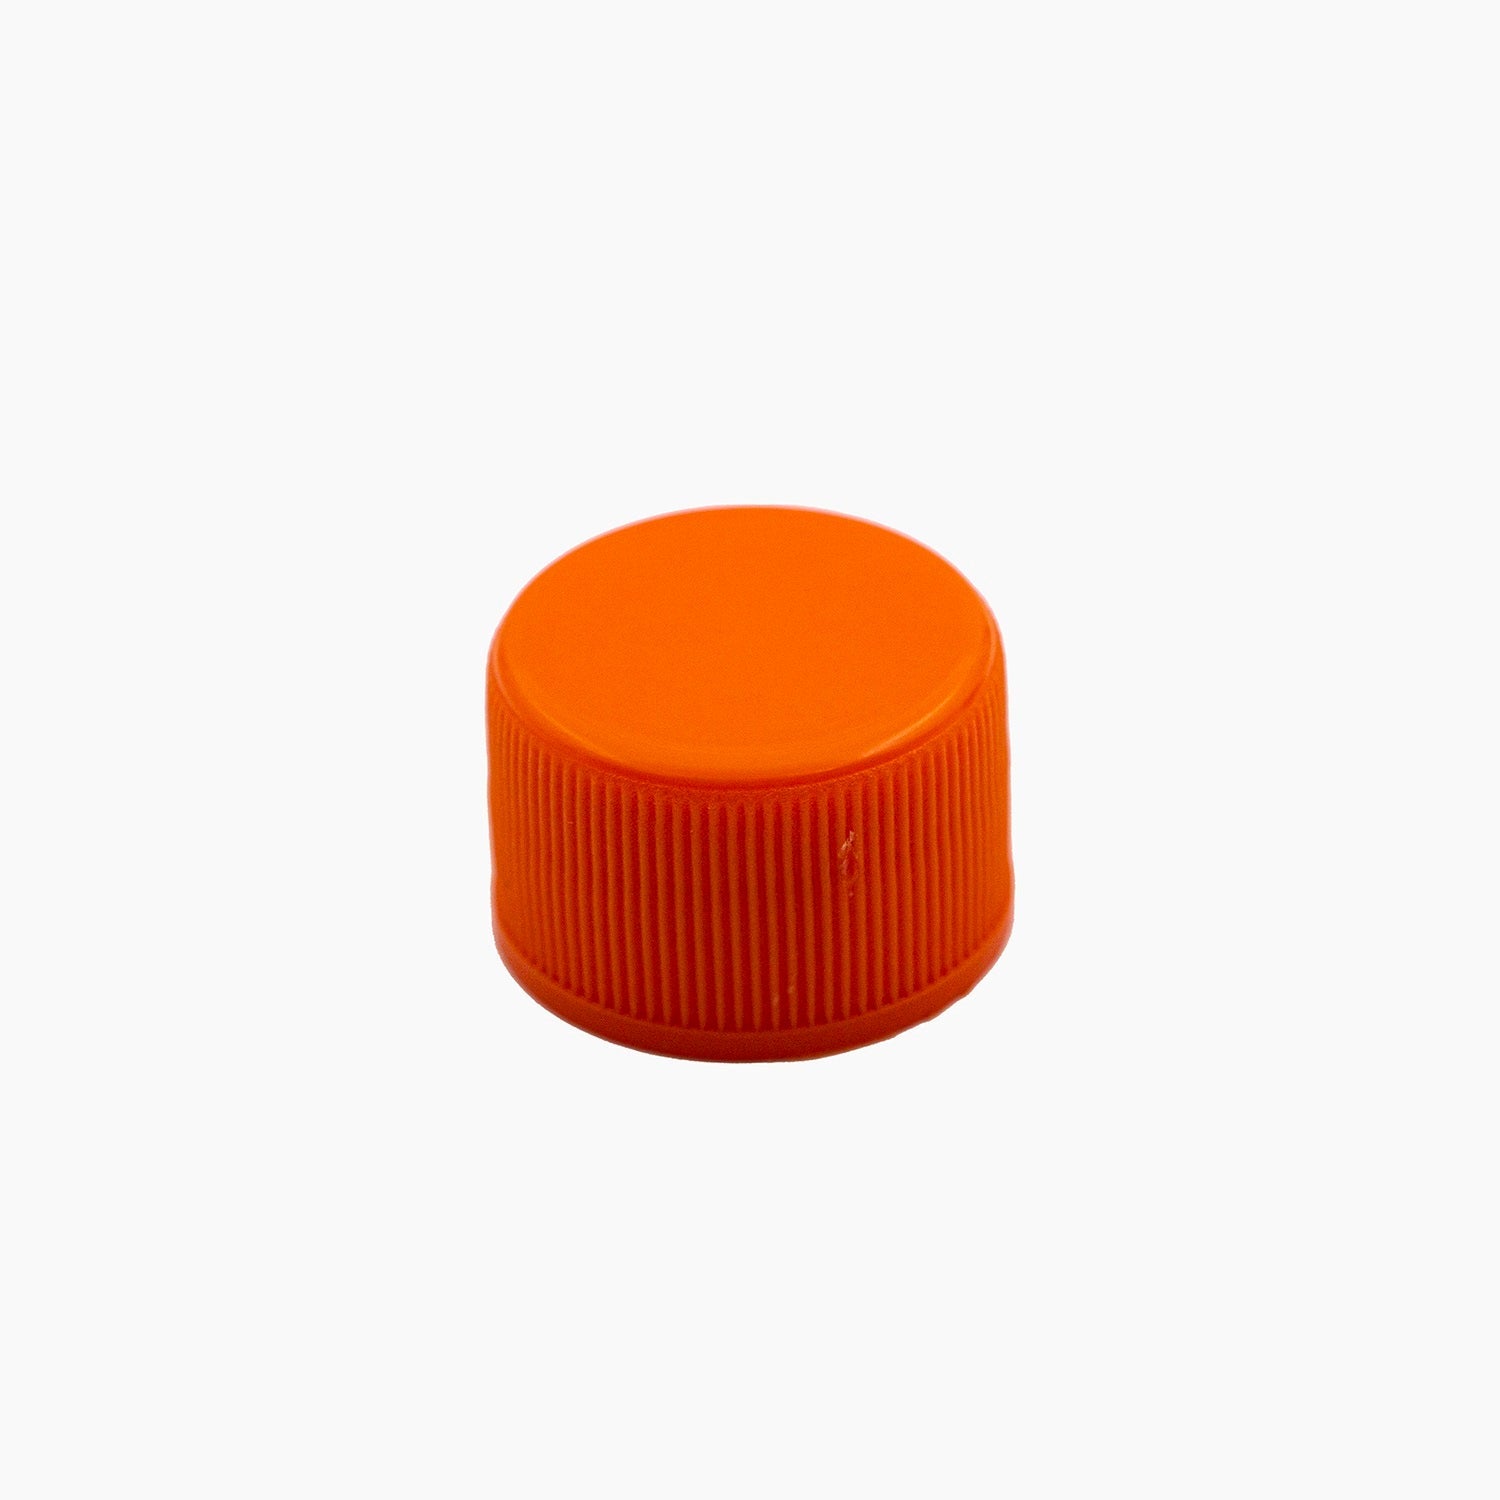 Orange 24mm Plastic Standard EPE Liner Bottle Cap On White Background | Brightpack Closures And Accessories